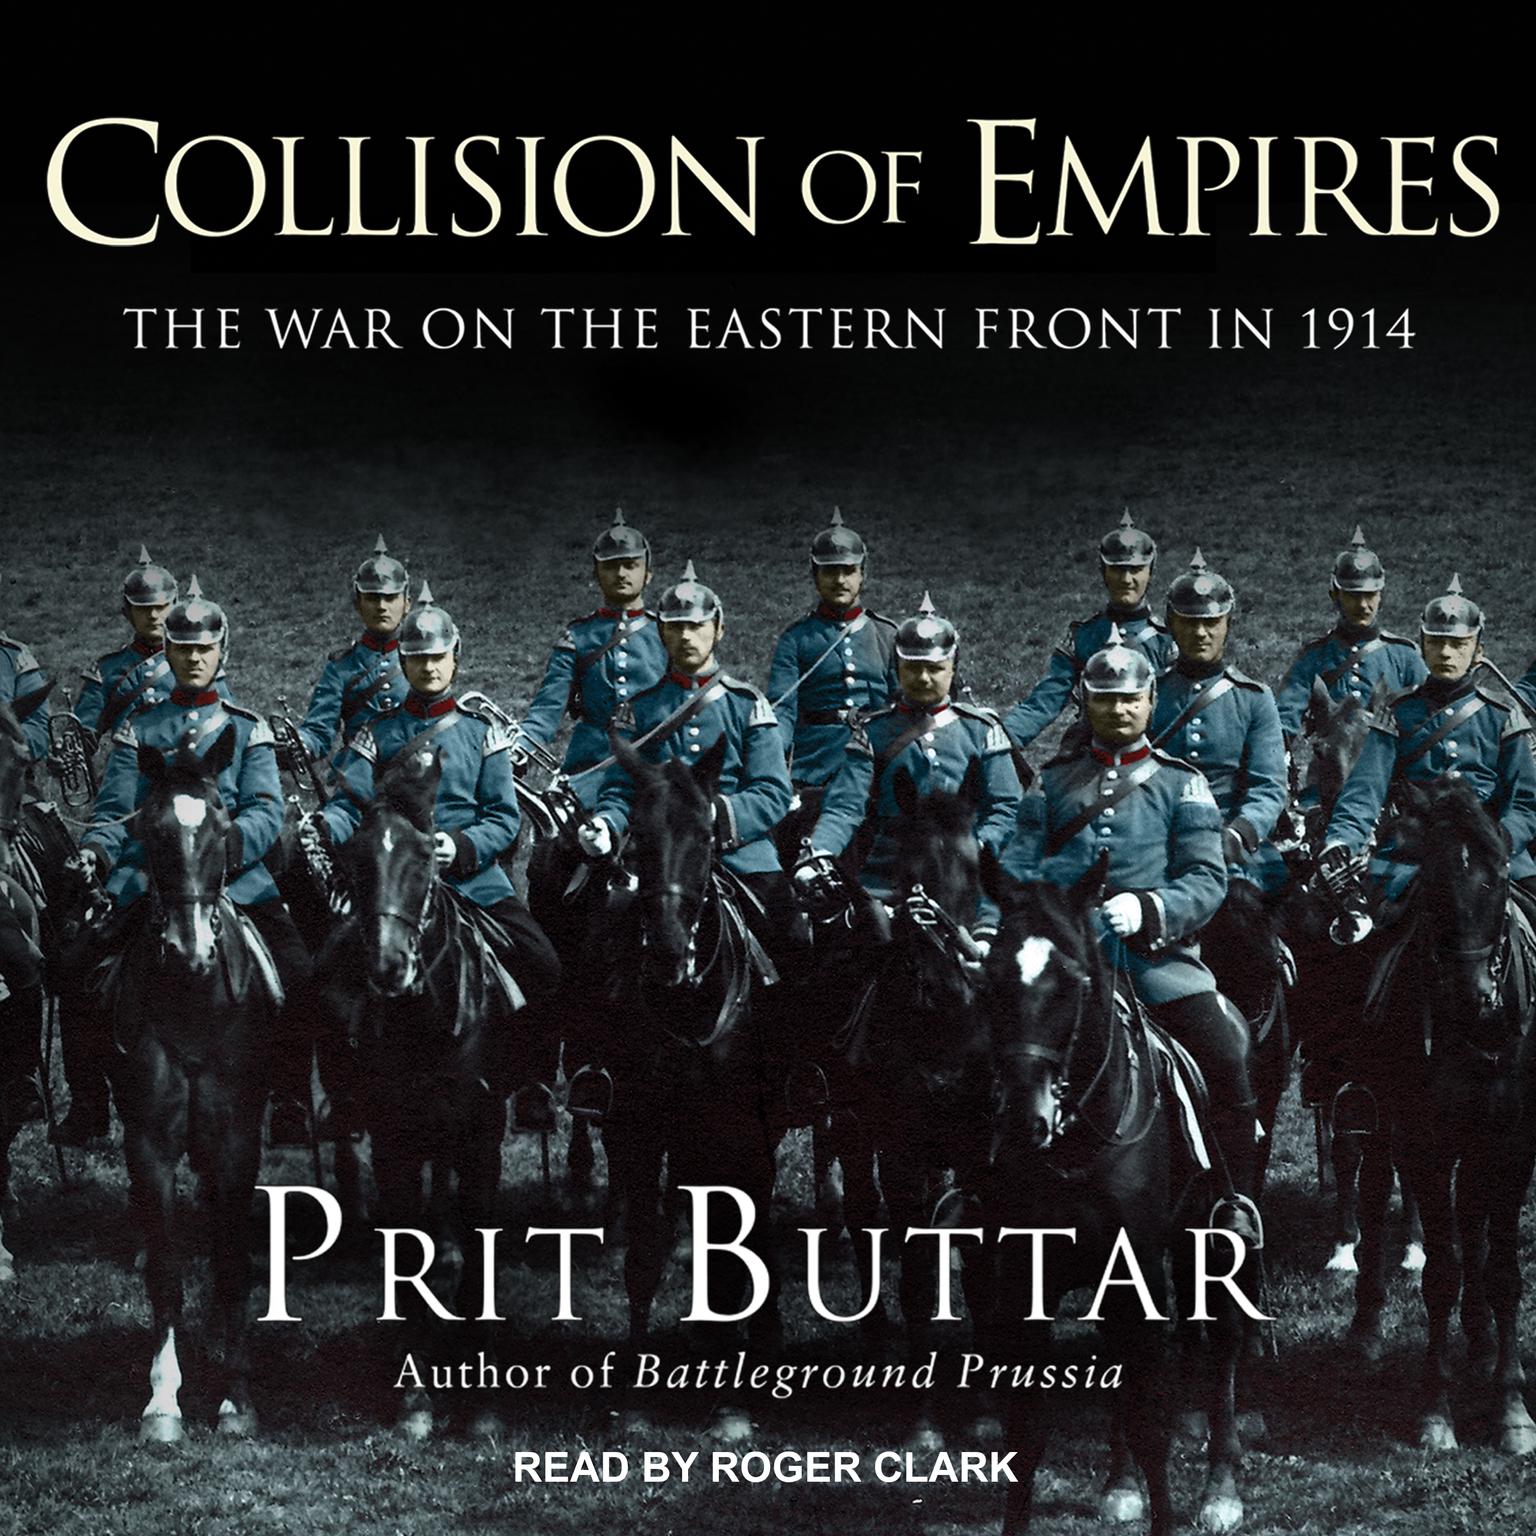 Collision of Empires: The War on the Eastern Front in 1914 Audiobook, by Prit Buttar